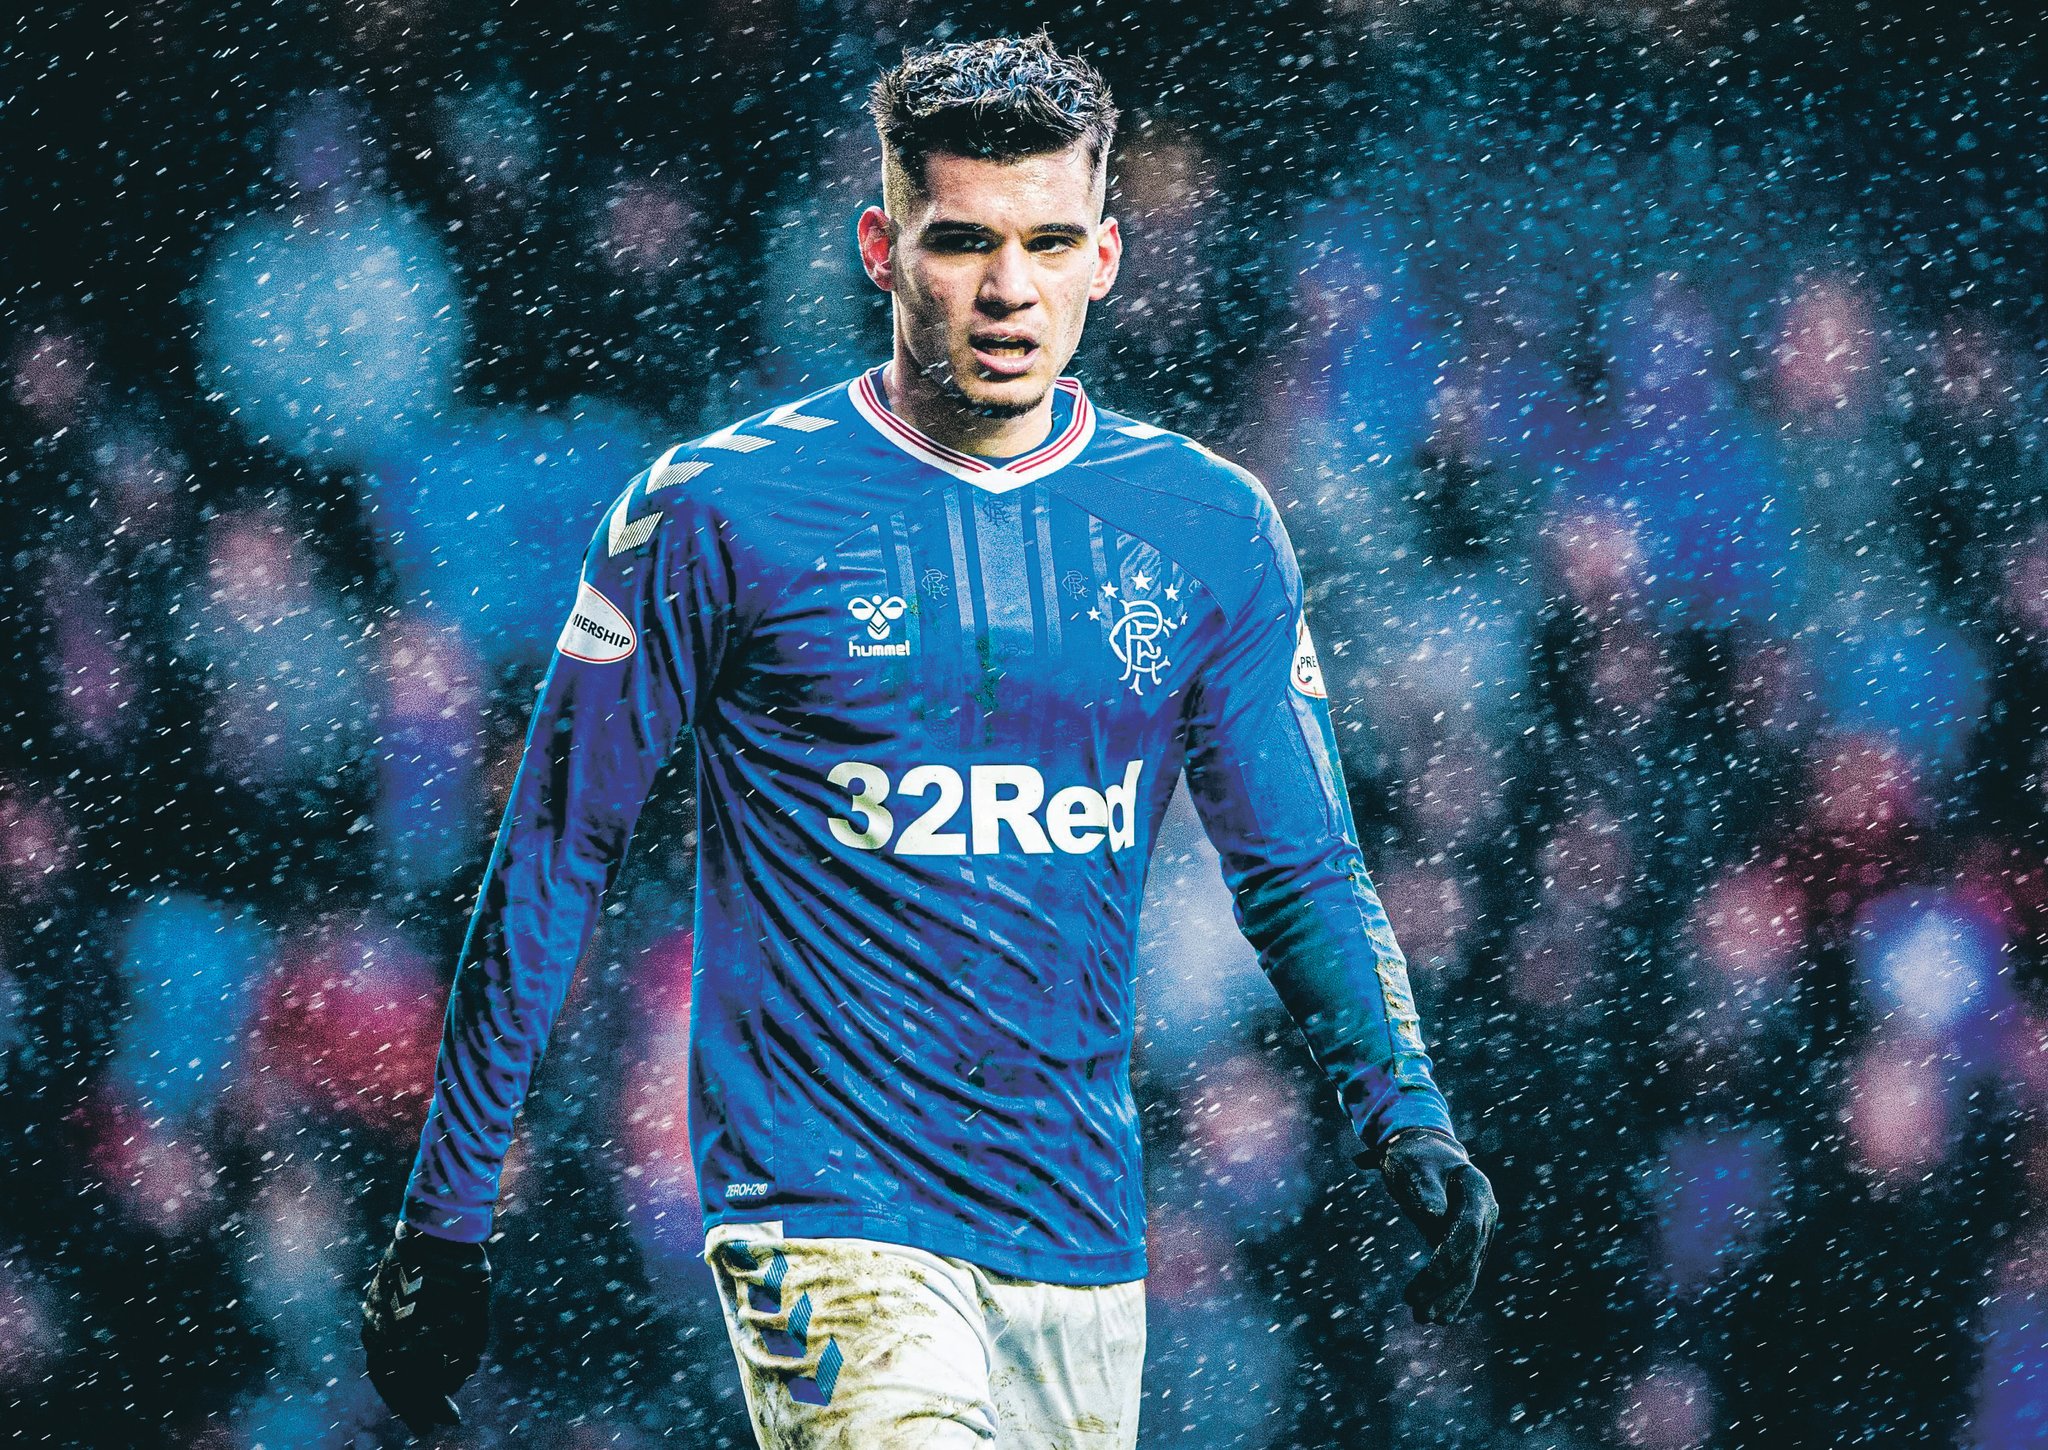 Ianis Hagi eager to stay but Rangers hang fire on permanent deal